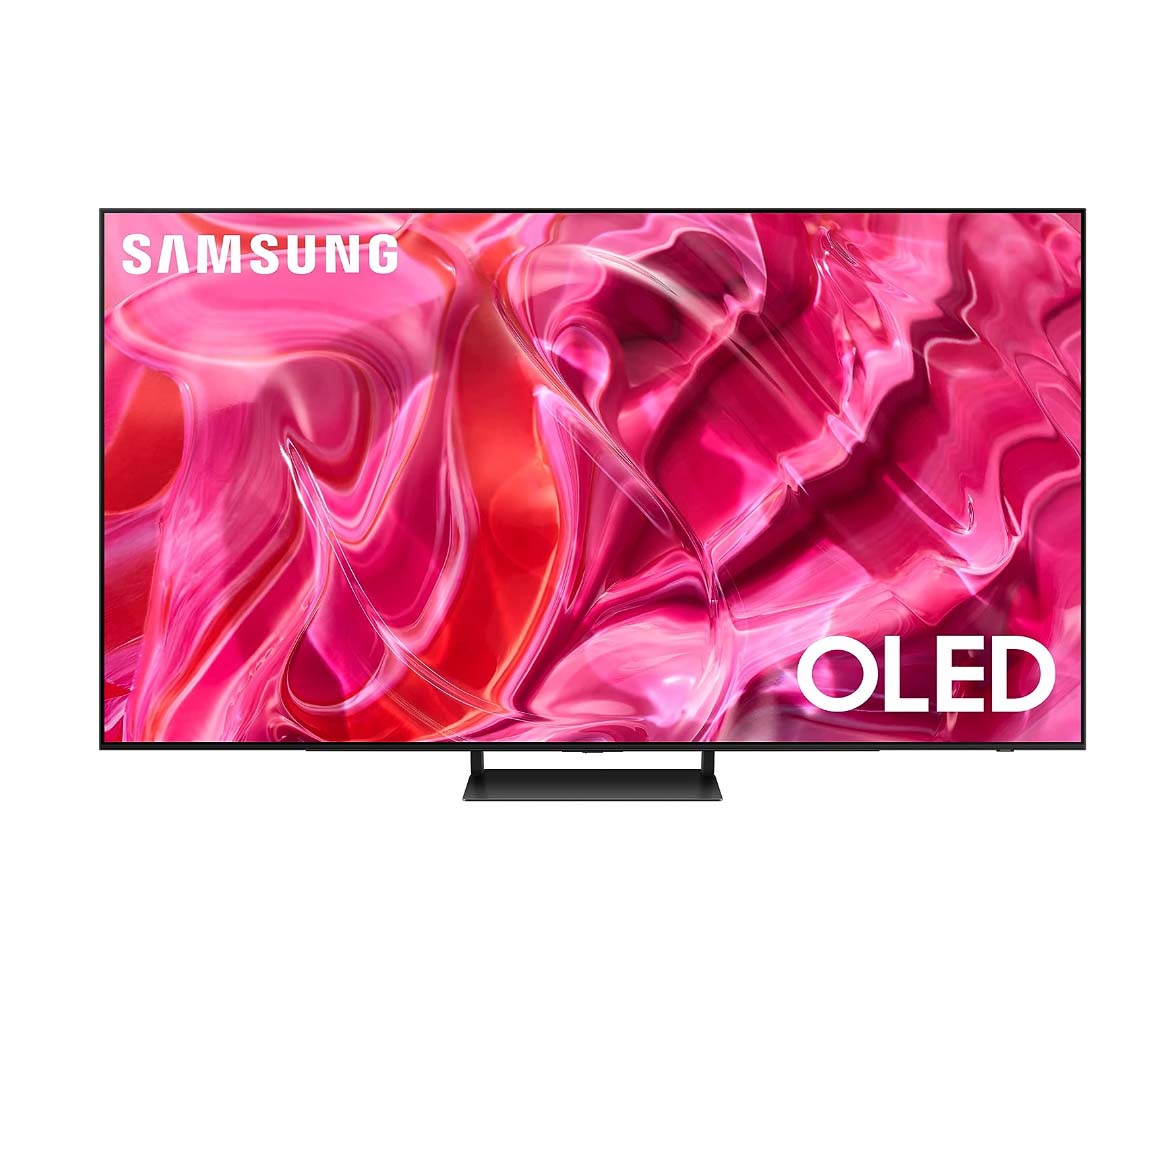 Image of SAMSUNG 65-Inch Class OLED 4K TV